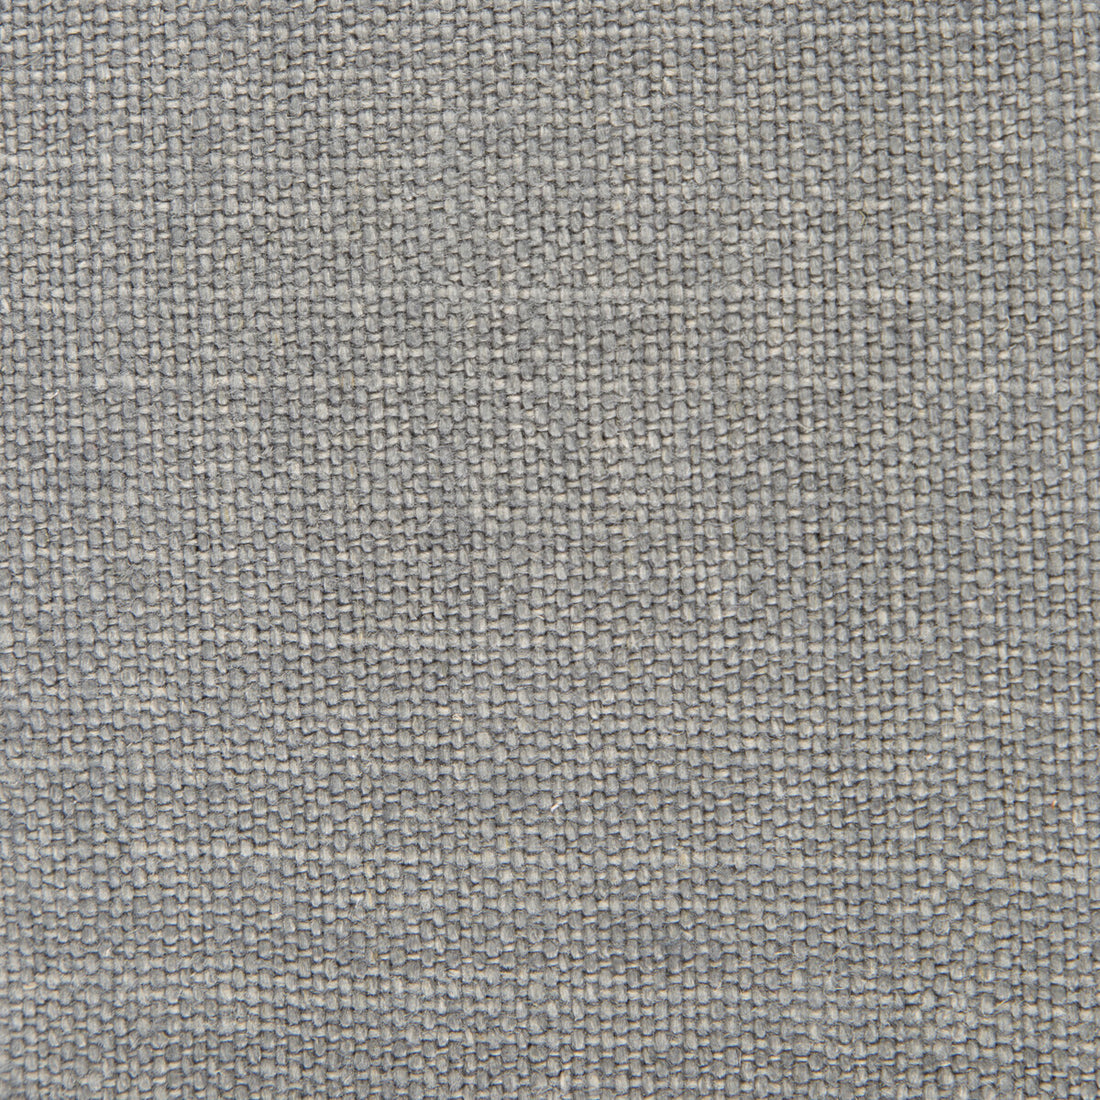 Nicaragua fabric in gris color - pattern GDT5239.017.0 - by Gaston y Daniela in the Basics collection